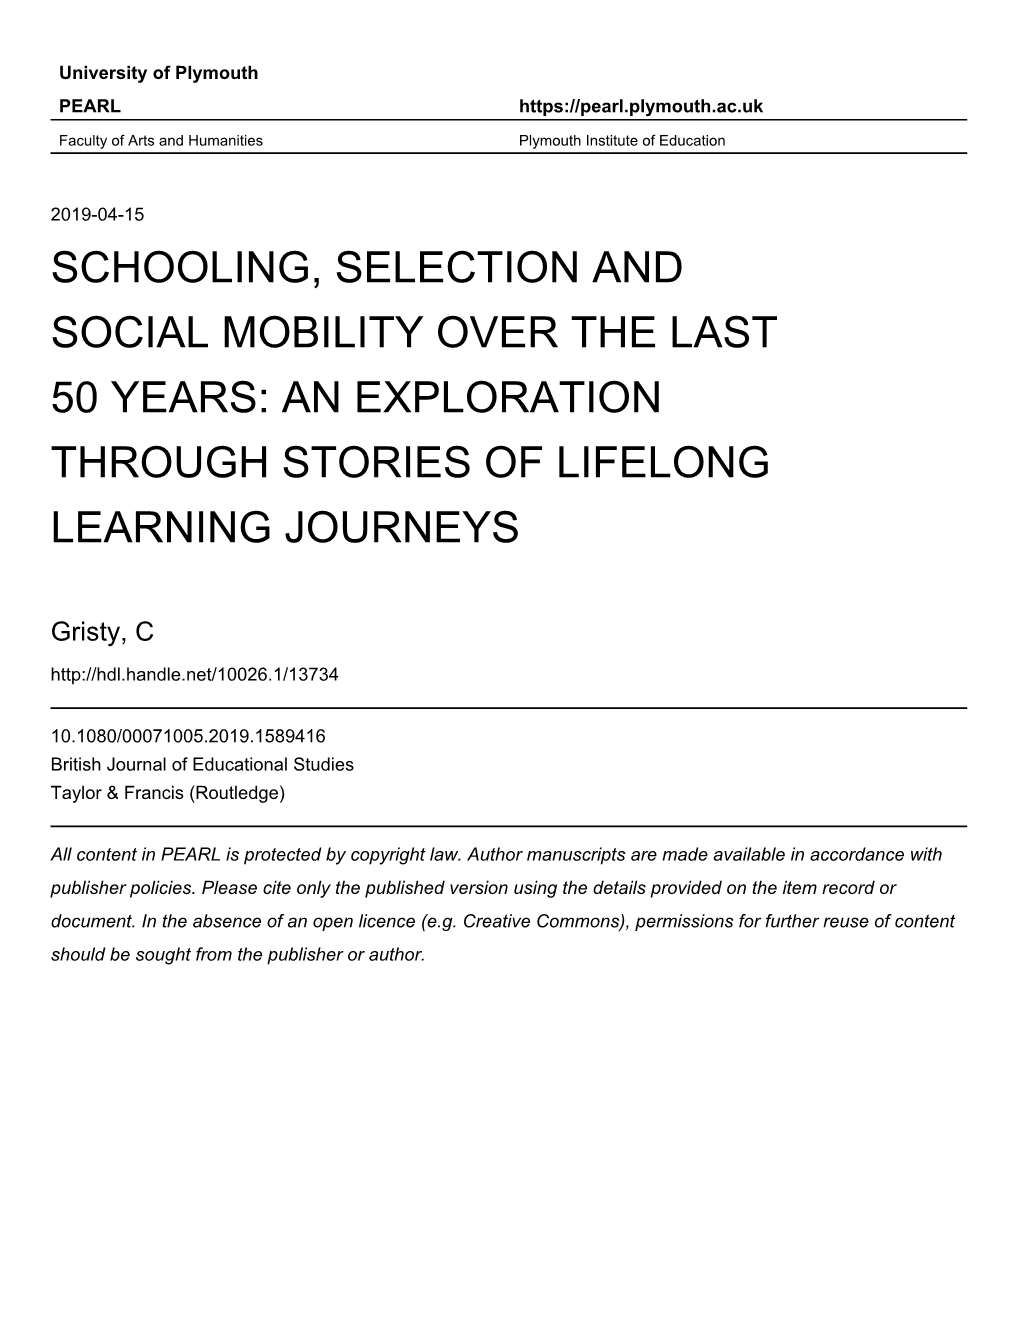 Schooling, Selection and Social Mobility Over the Last 50 Years: an Exploration Through Stories of Lifelong Learning Journeys